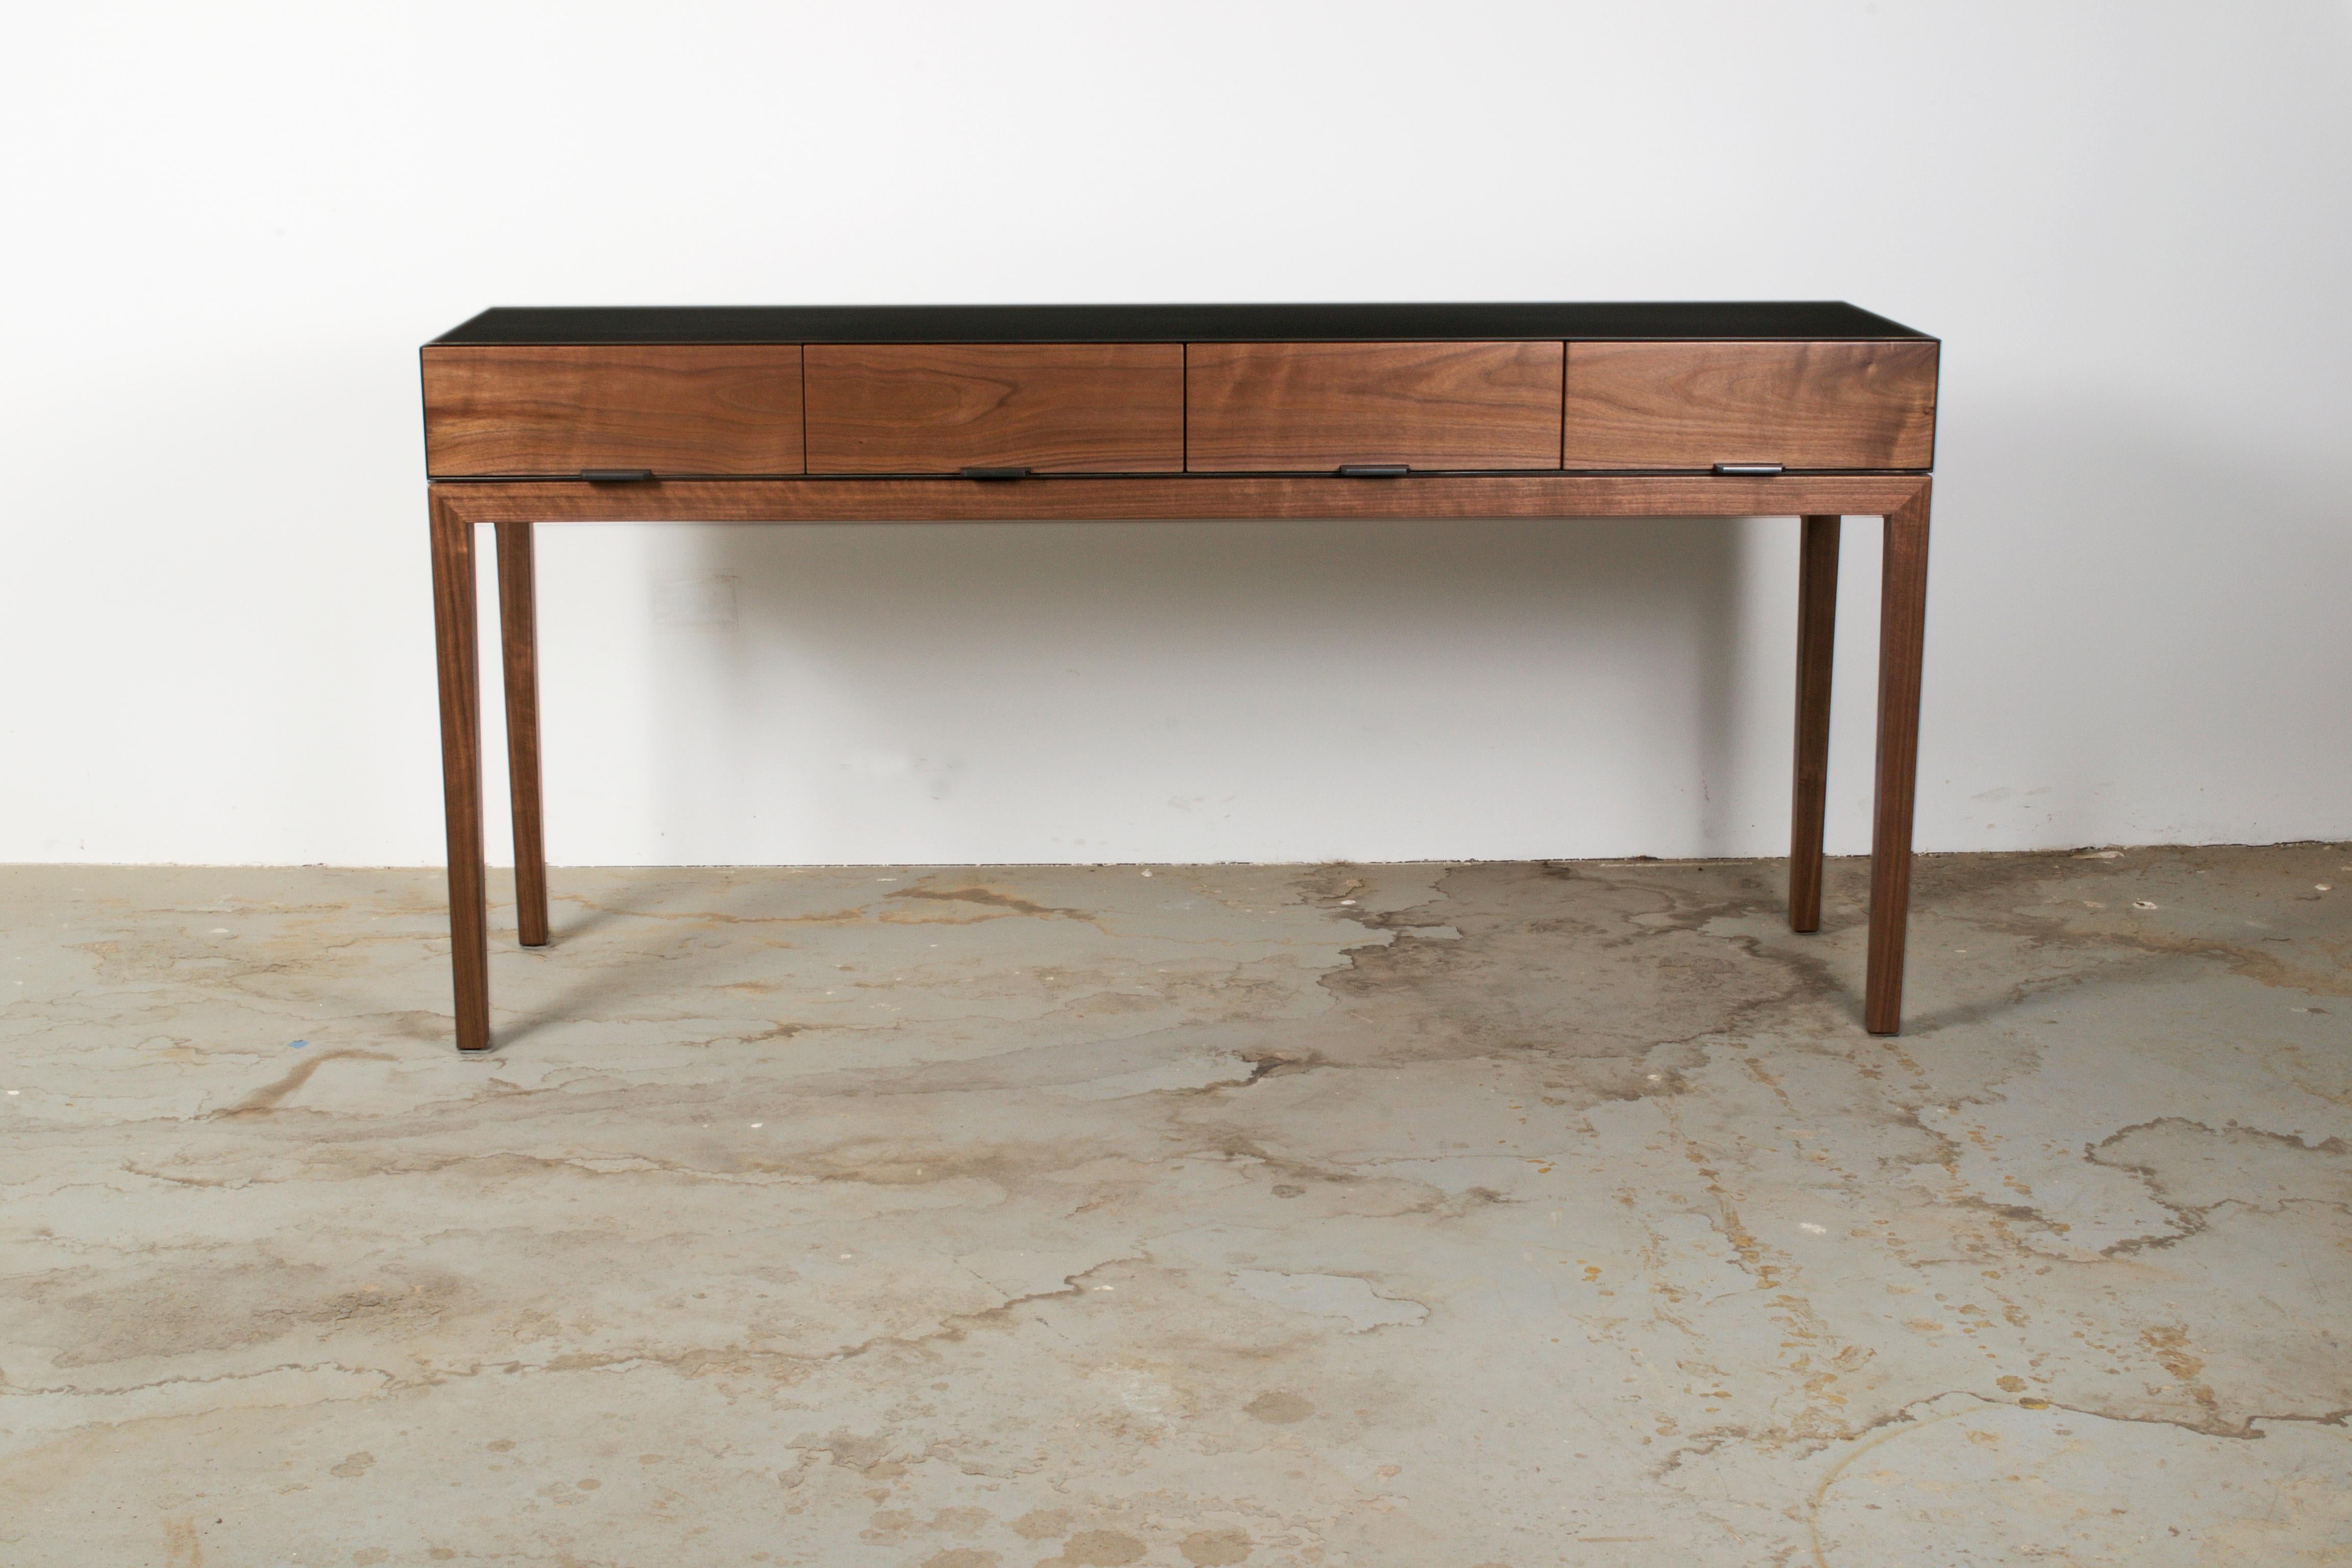 Taper series console with grain matched drawers, featuring a Hot Rolled steel case and tapered legs. Shown in Walnut, with custom steel pulls. Drawers on luxe soft close under-mount glides. 

Measures: 66